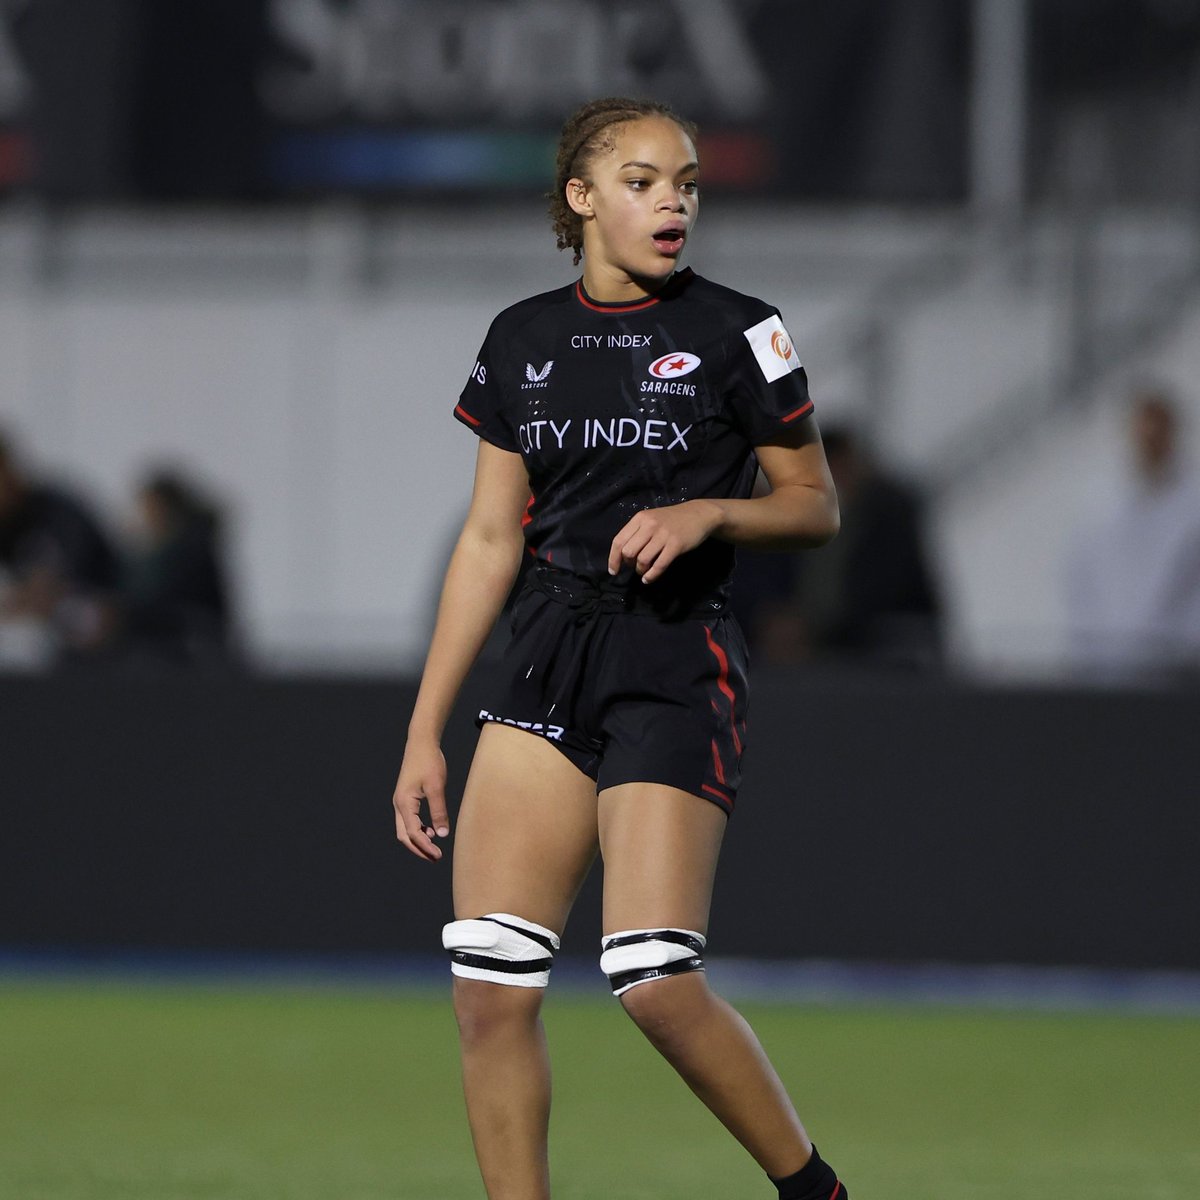 Amelia, Chloe and Joia have all been named in the @RedRosesRugby U20s squad to face Wales this weekend. 🌹 Good luck to all 3️⃣ of our young guns! #YourSaracens💫